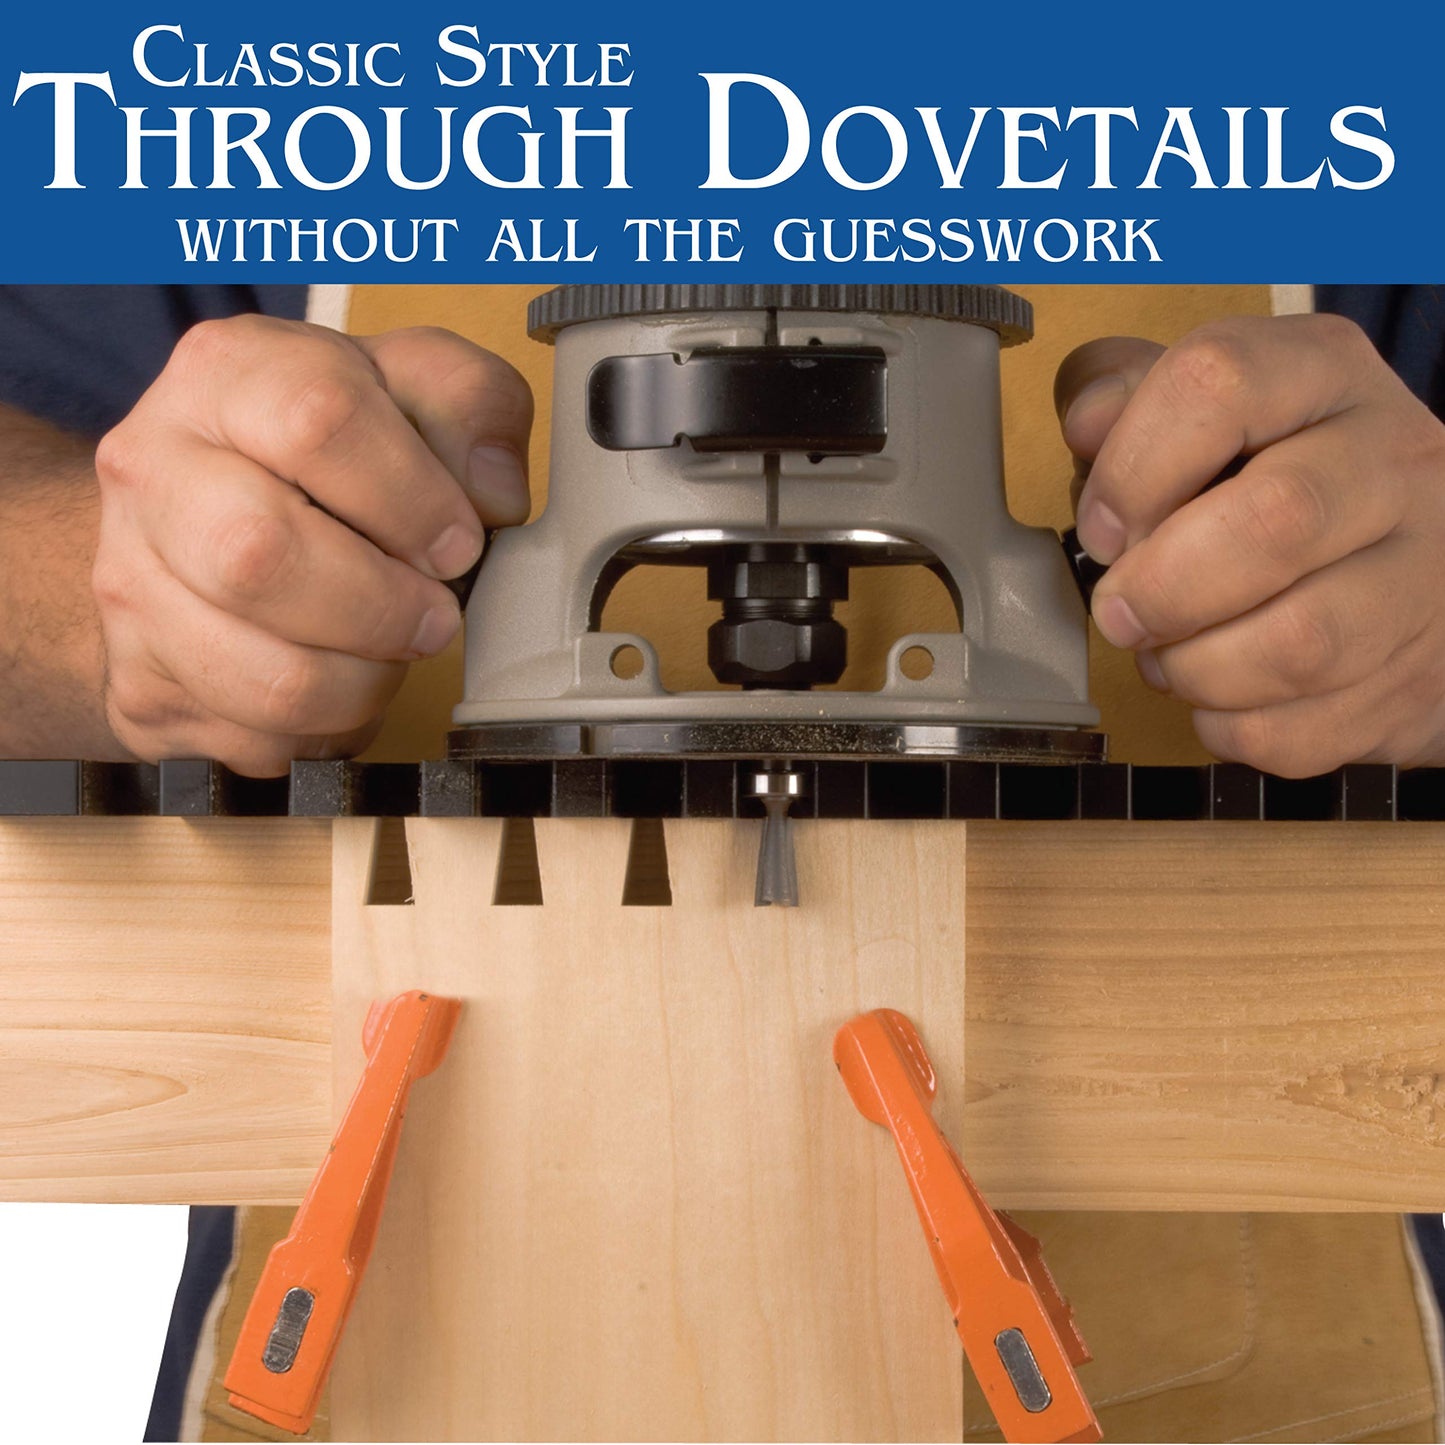 Peachtree Dovetail Jig System with One Flush Trim Router Bit One Dovetail Router Bit and Aluminum Jig Template with Full Color Instructions